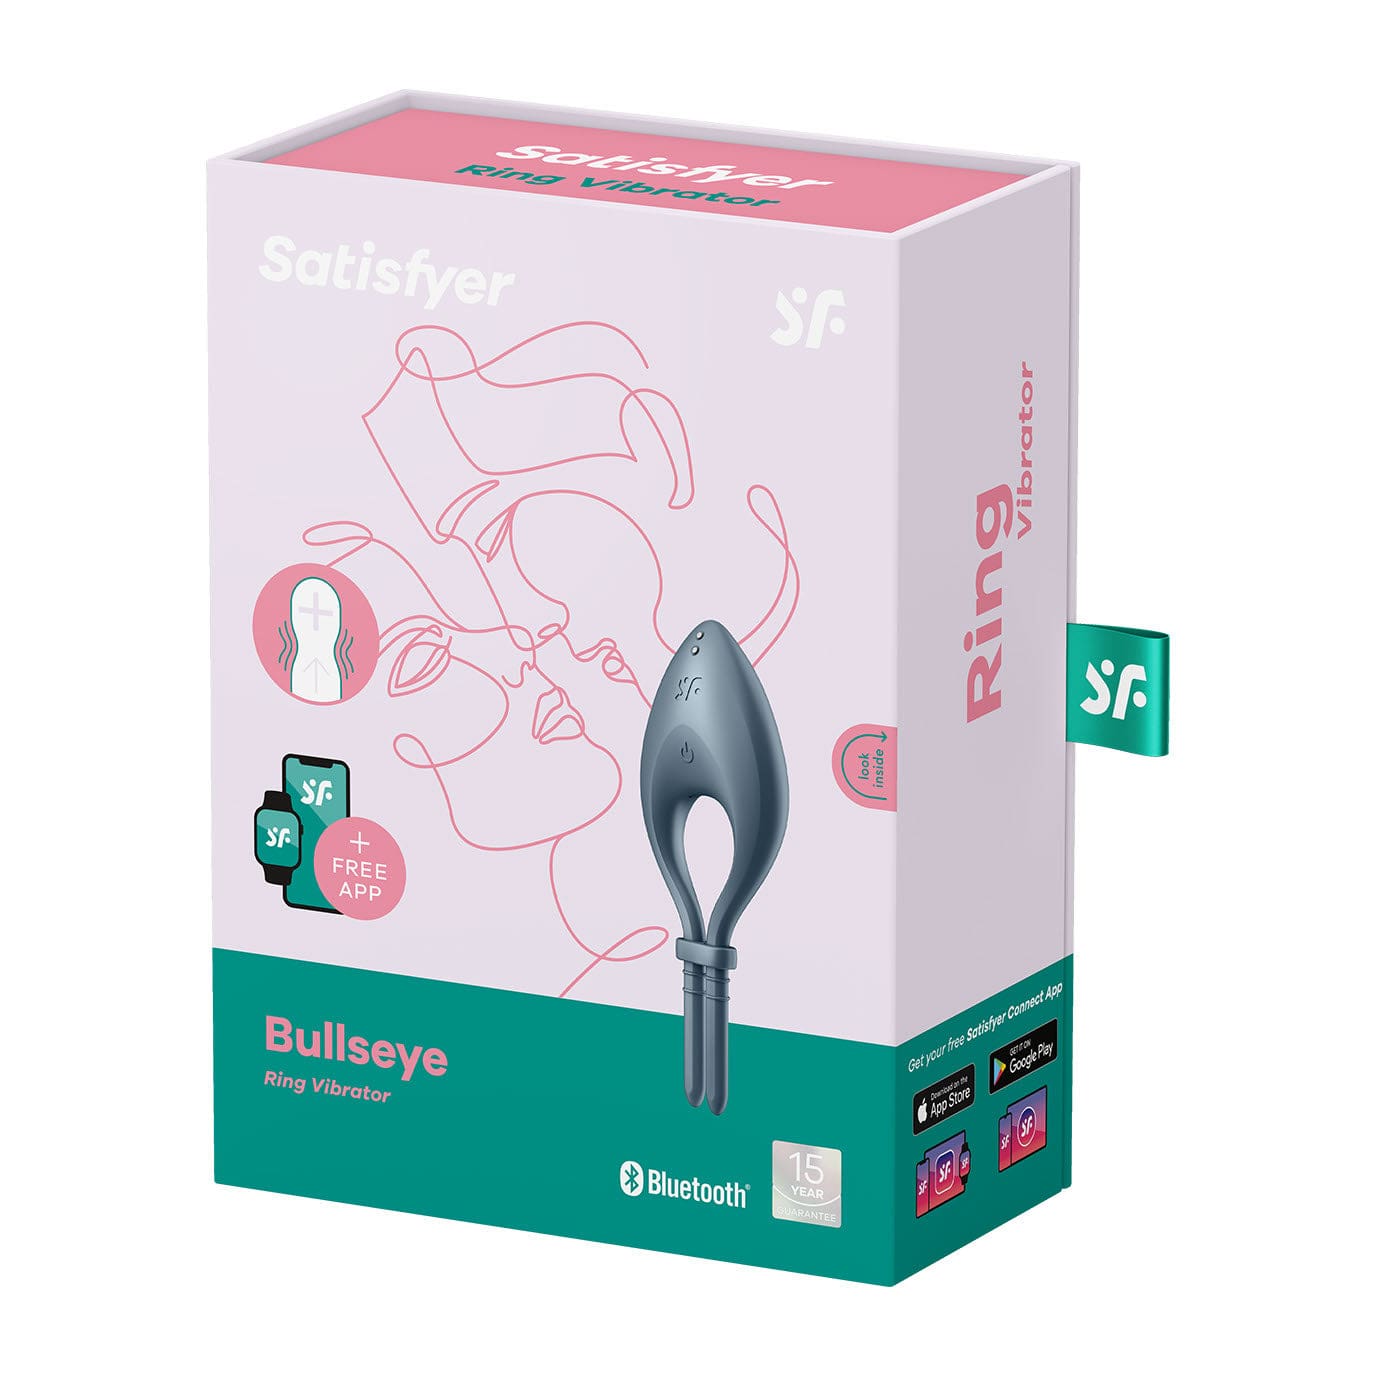 Satisfyer - Bulls Eye App-Controlled Adjustable Vibrating Cock Ring (Grey) Silicone Cock Ring (Vibration) Rechargeable 572884570 CherryAffairs